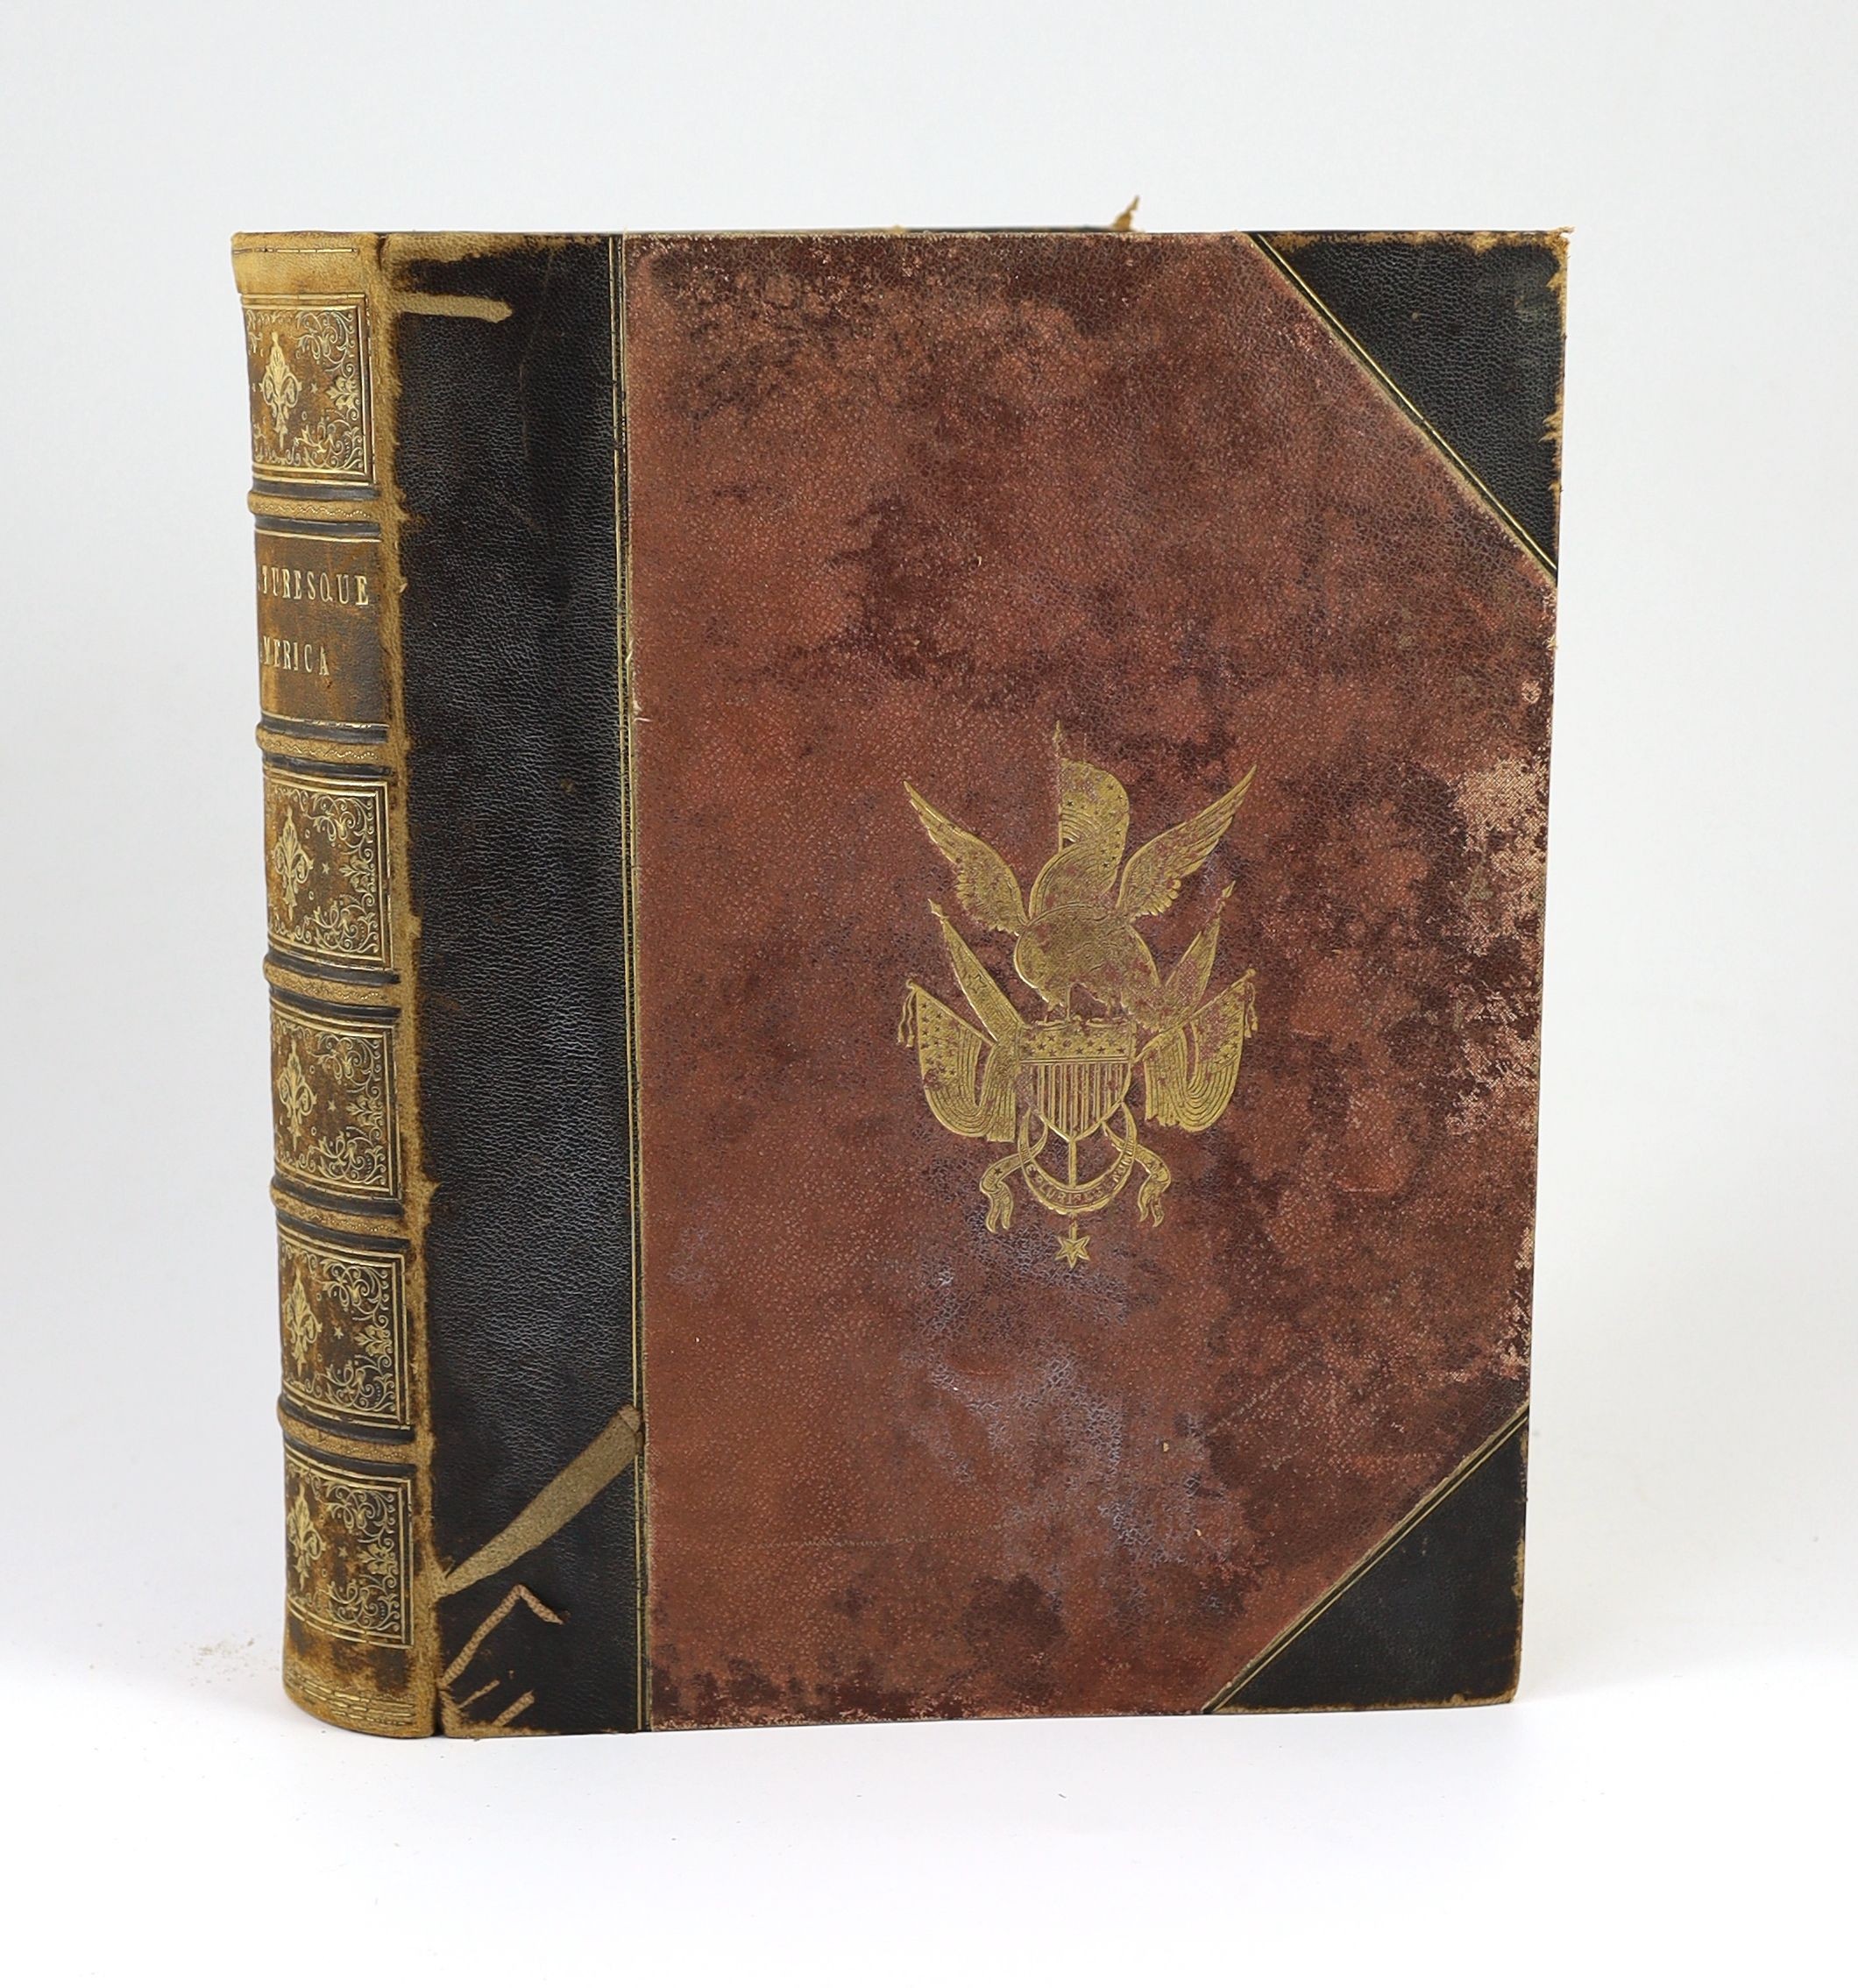 Bryant, William Cullen (editor) - Picturesque America; or, The Land we Live In, vol. 1 only (of 2) 4to, original half morocco, worn and torn, New York, [1872-74] and Select Views in London, 2 vols in 1, 4to, half morocco